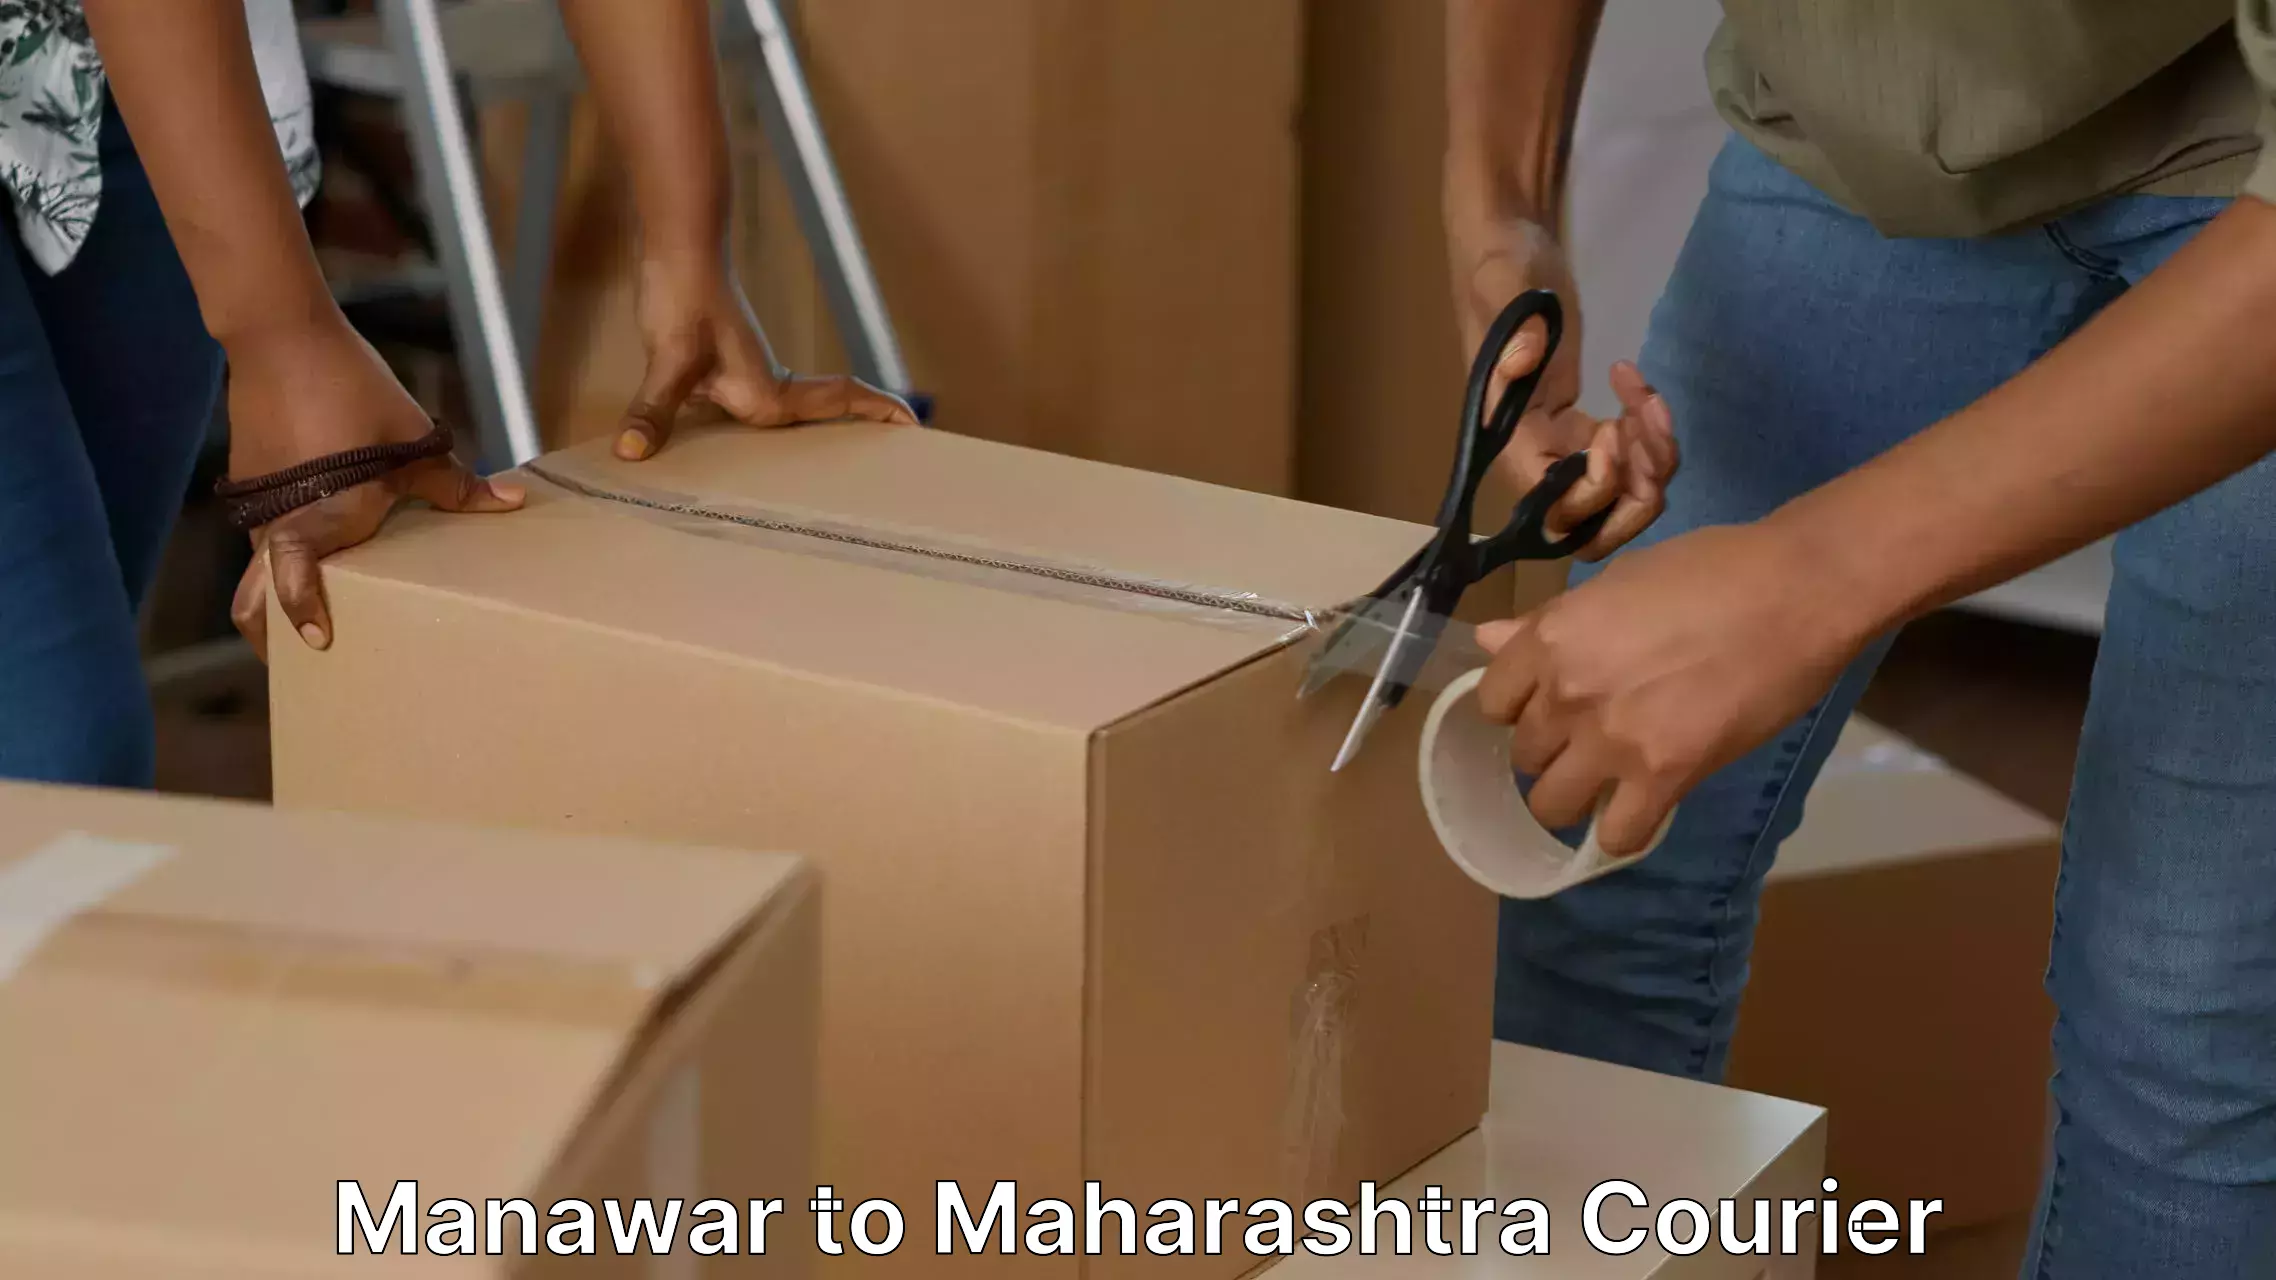 Comprehensive moving services in Manawar to Bhiwandi